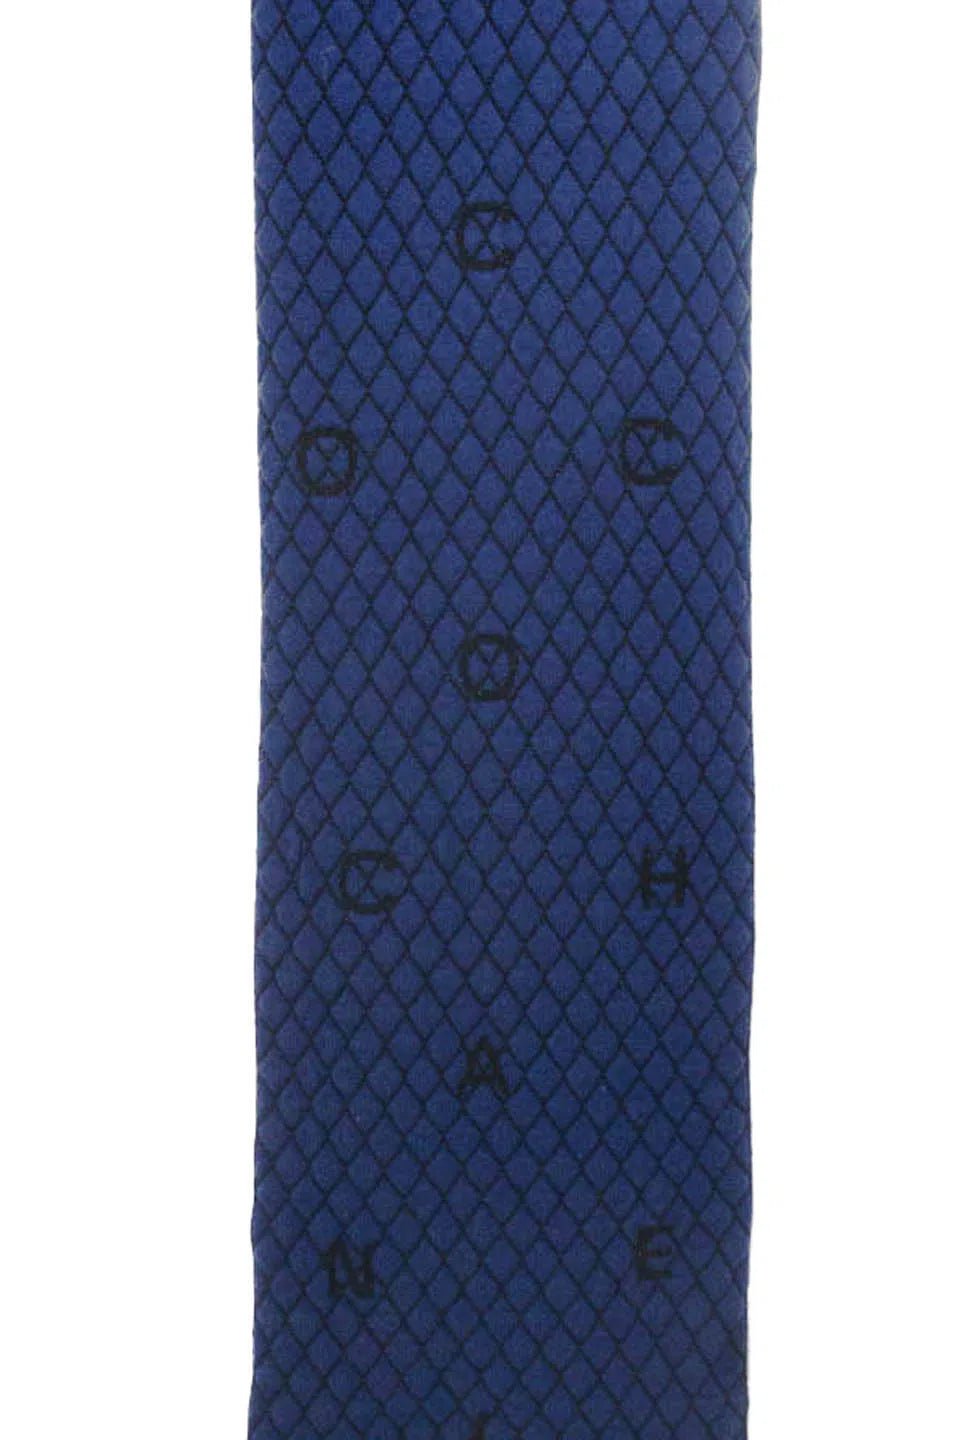 Chanel Quilted Design C H A N E L Letters Oblong Cashmere Scarf - Navy - Foxy Couture Carmel